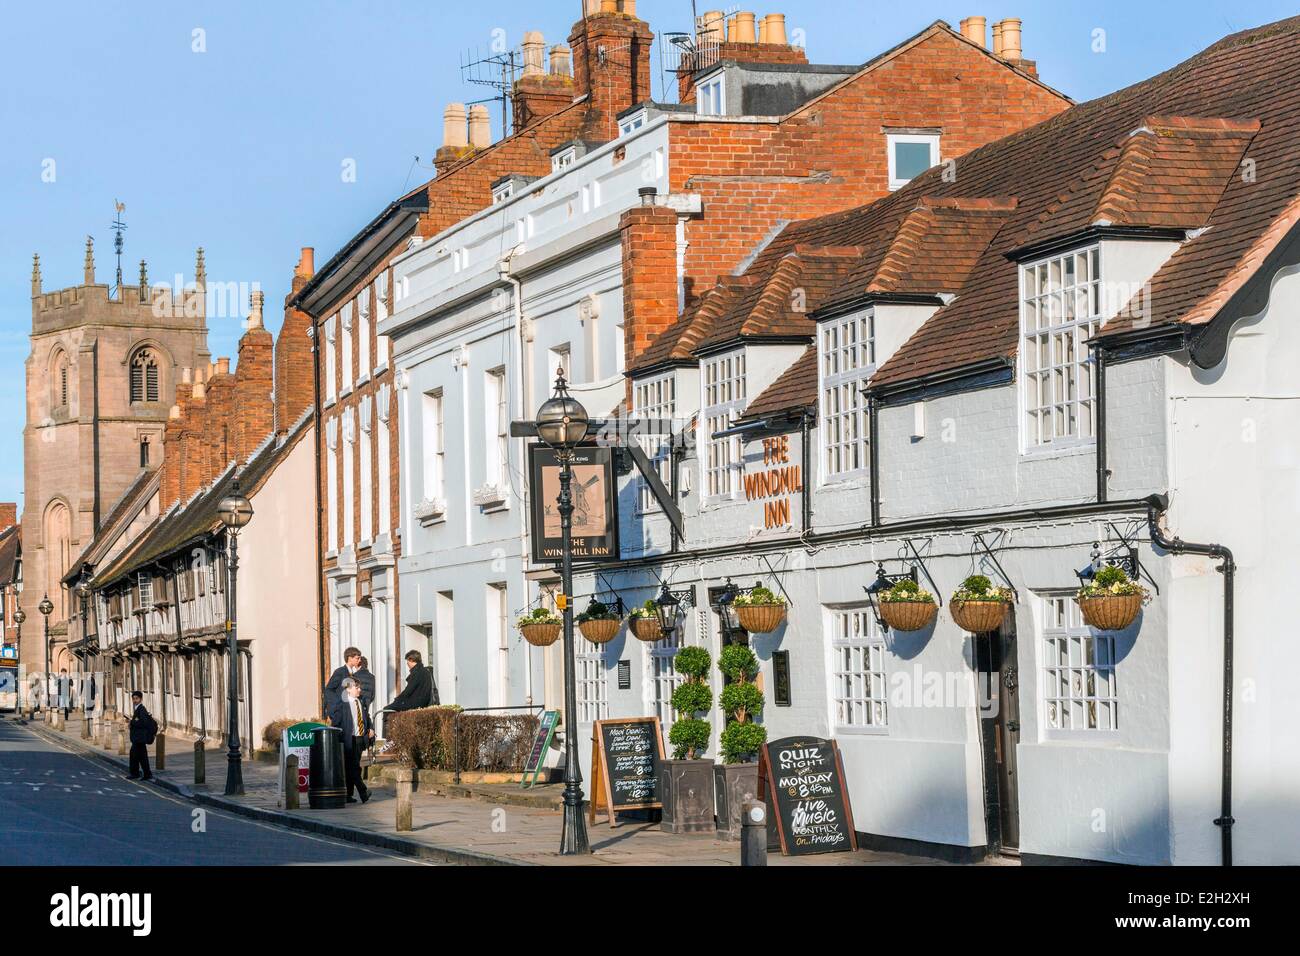 United Kingdom Warwickshire Stratford-upon-Avon Chapel Street Windmill Inn hostel located in a house of 16th century and Guild Chapel dated 15th century in background Stock Photo